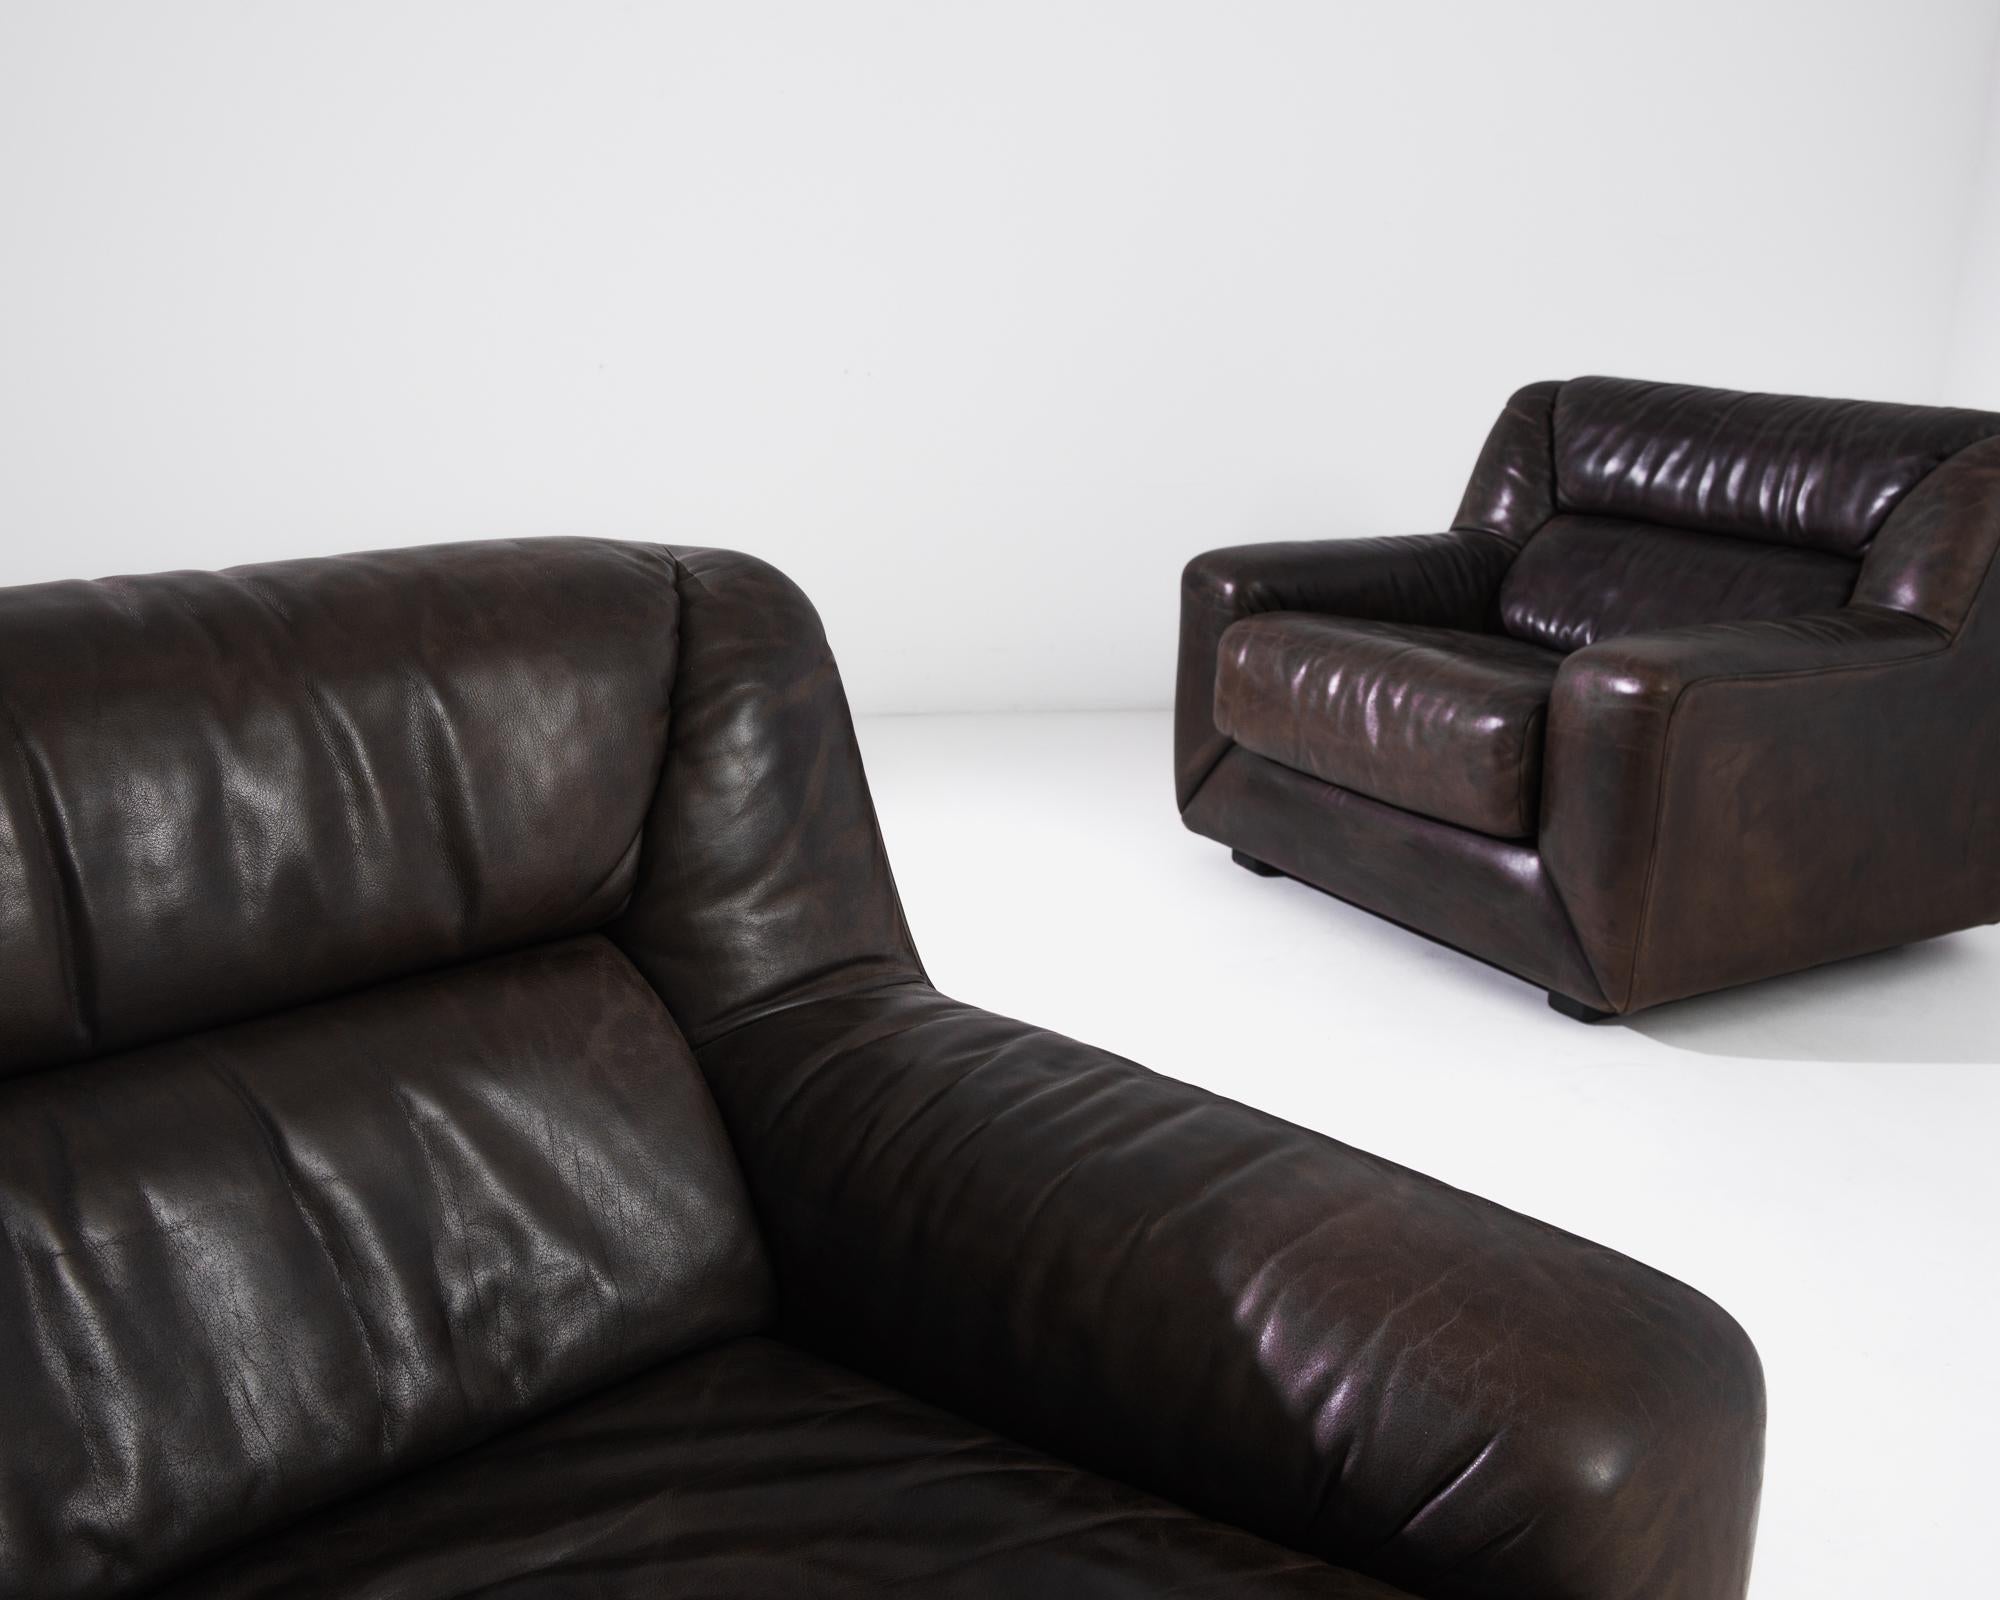 A pair of upholstered leather armchairs made circa 1970 by the iconic company De Sede, a Swiss manufacturer of exclusive furniture. These low and wide lounge chairs lay full focus on comfort and authentic design. The cubic structure gives them an